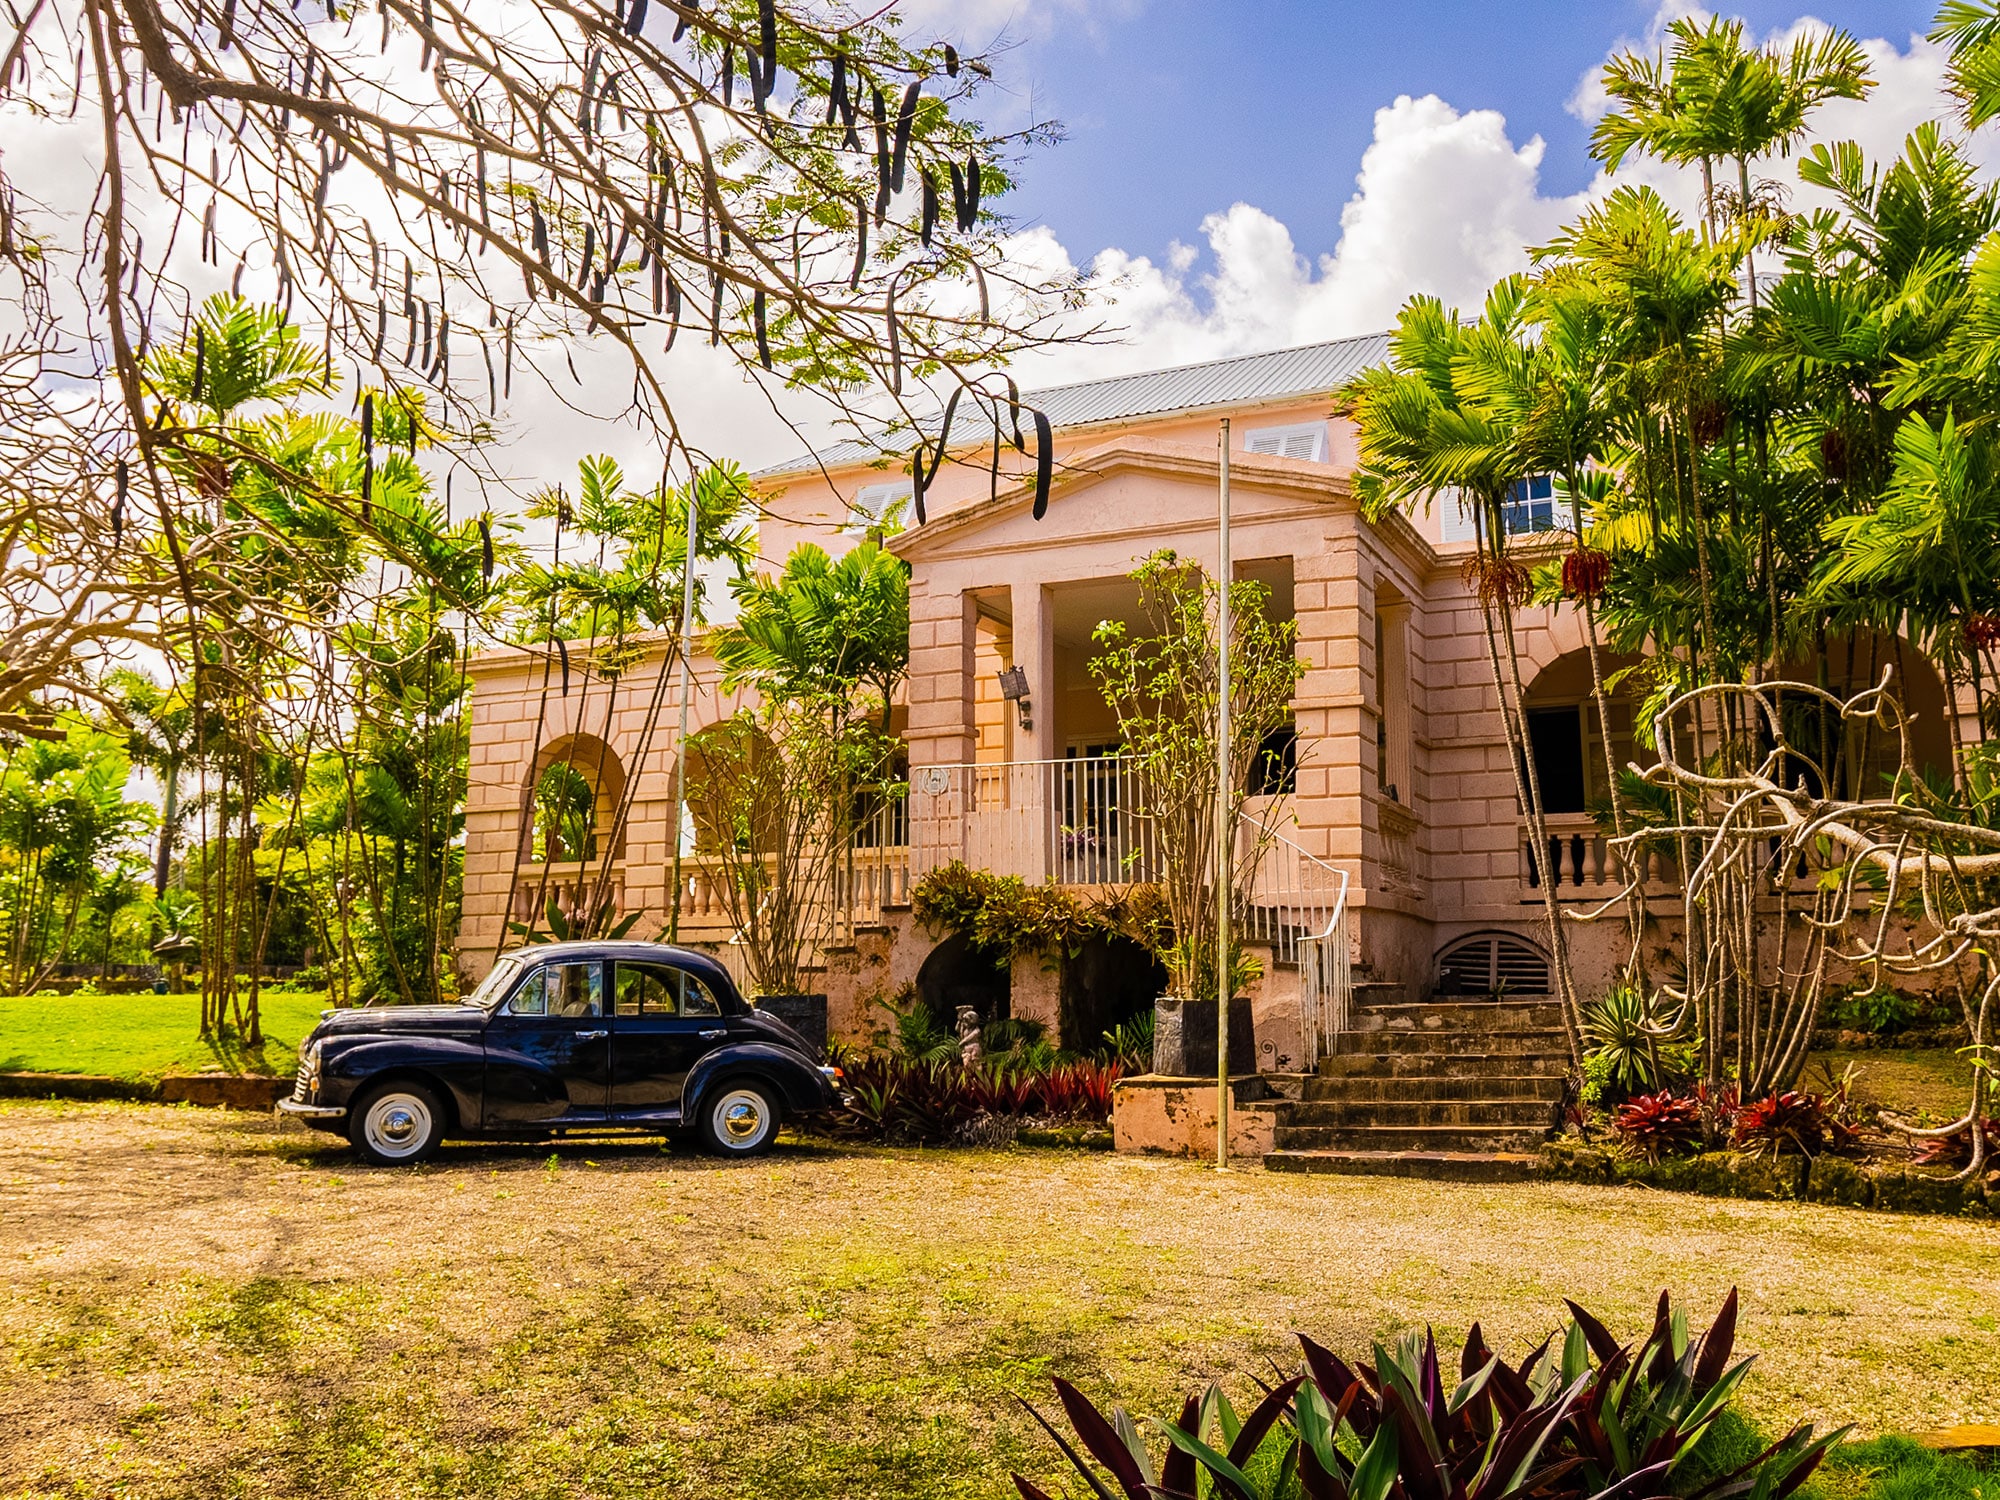 The exterior of the Clifton Hall Great House on the Caribbean island of Barbados.